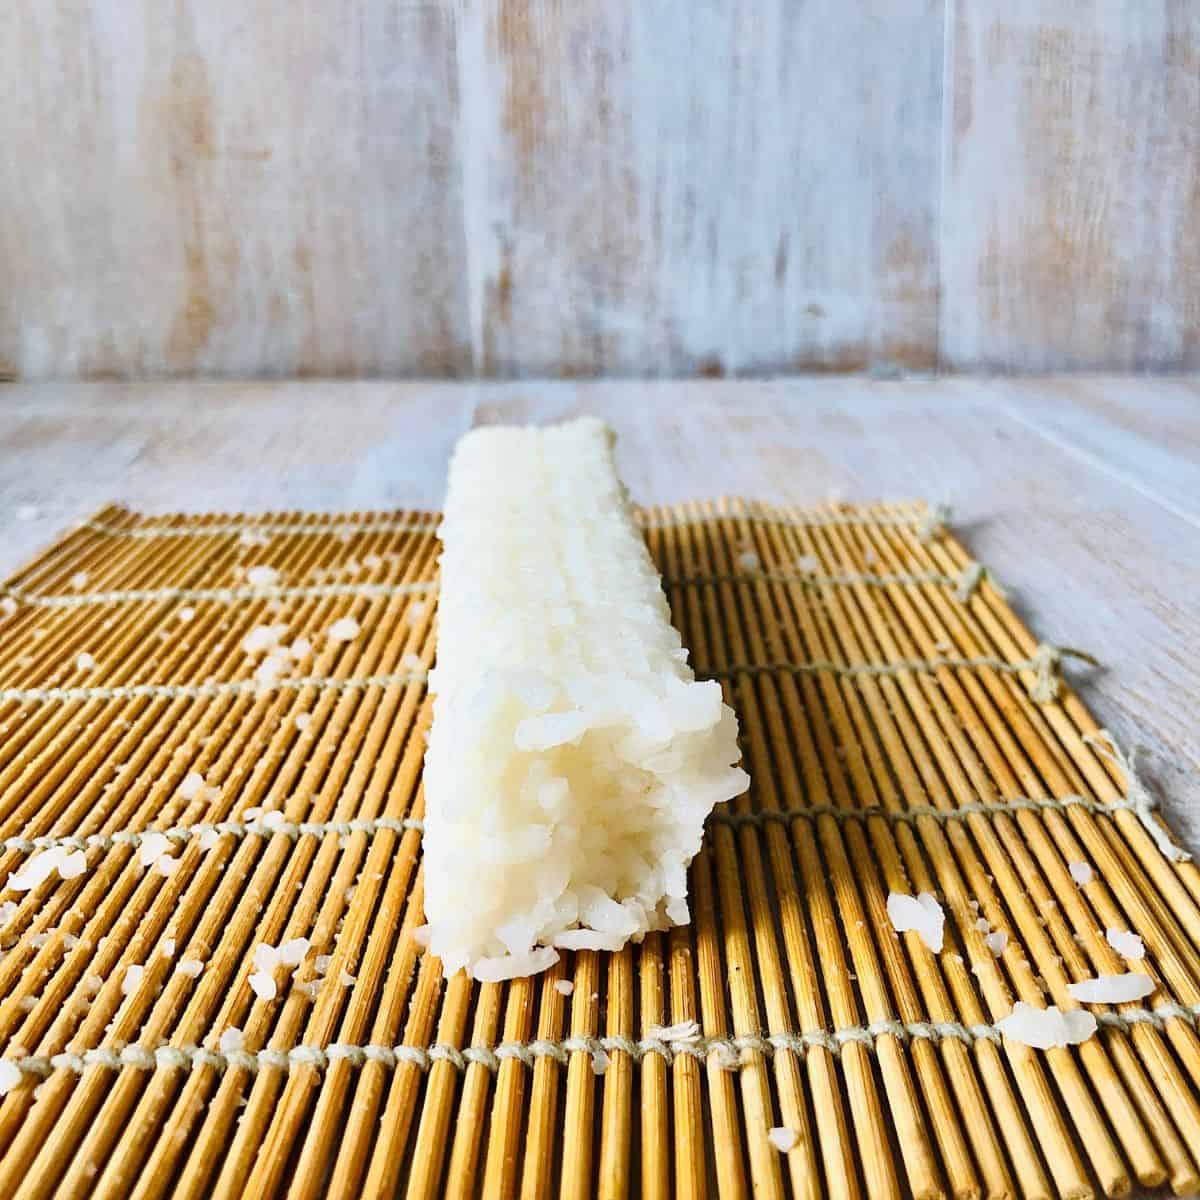 Close up of sushi rice formed into a log with a square profile on a sushi mat.